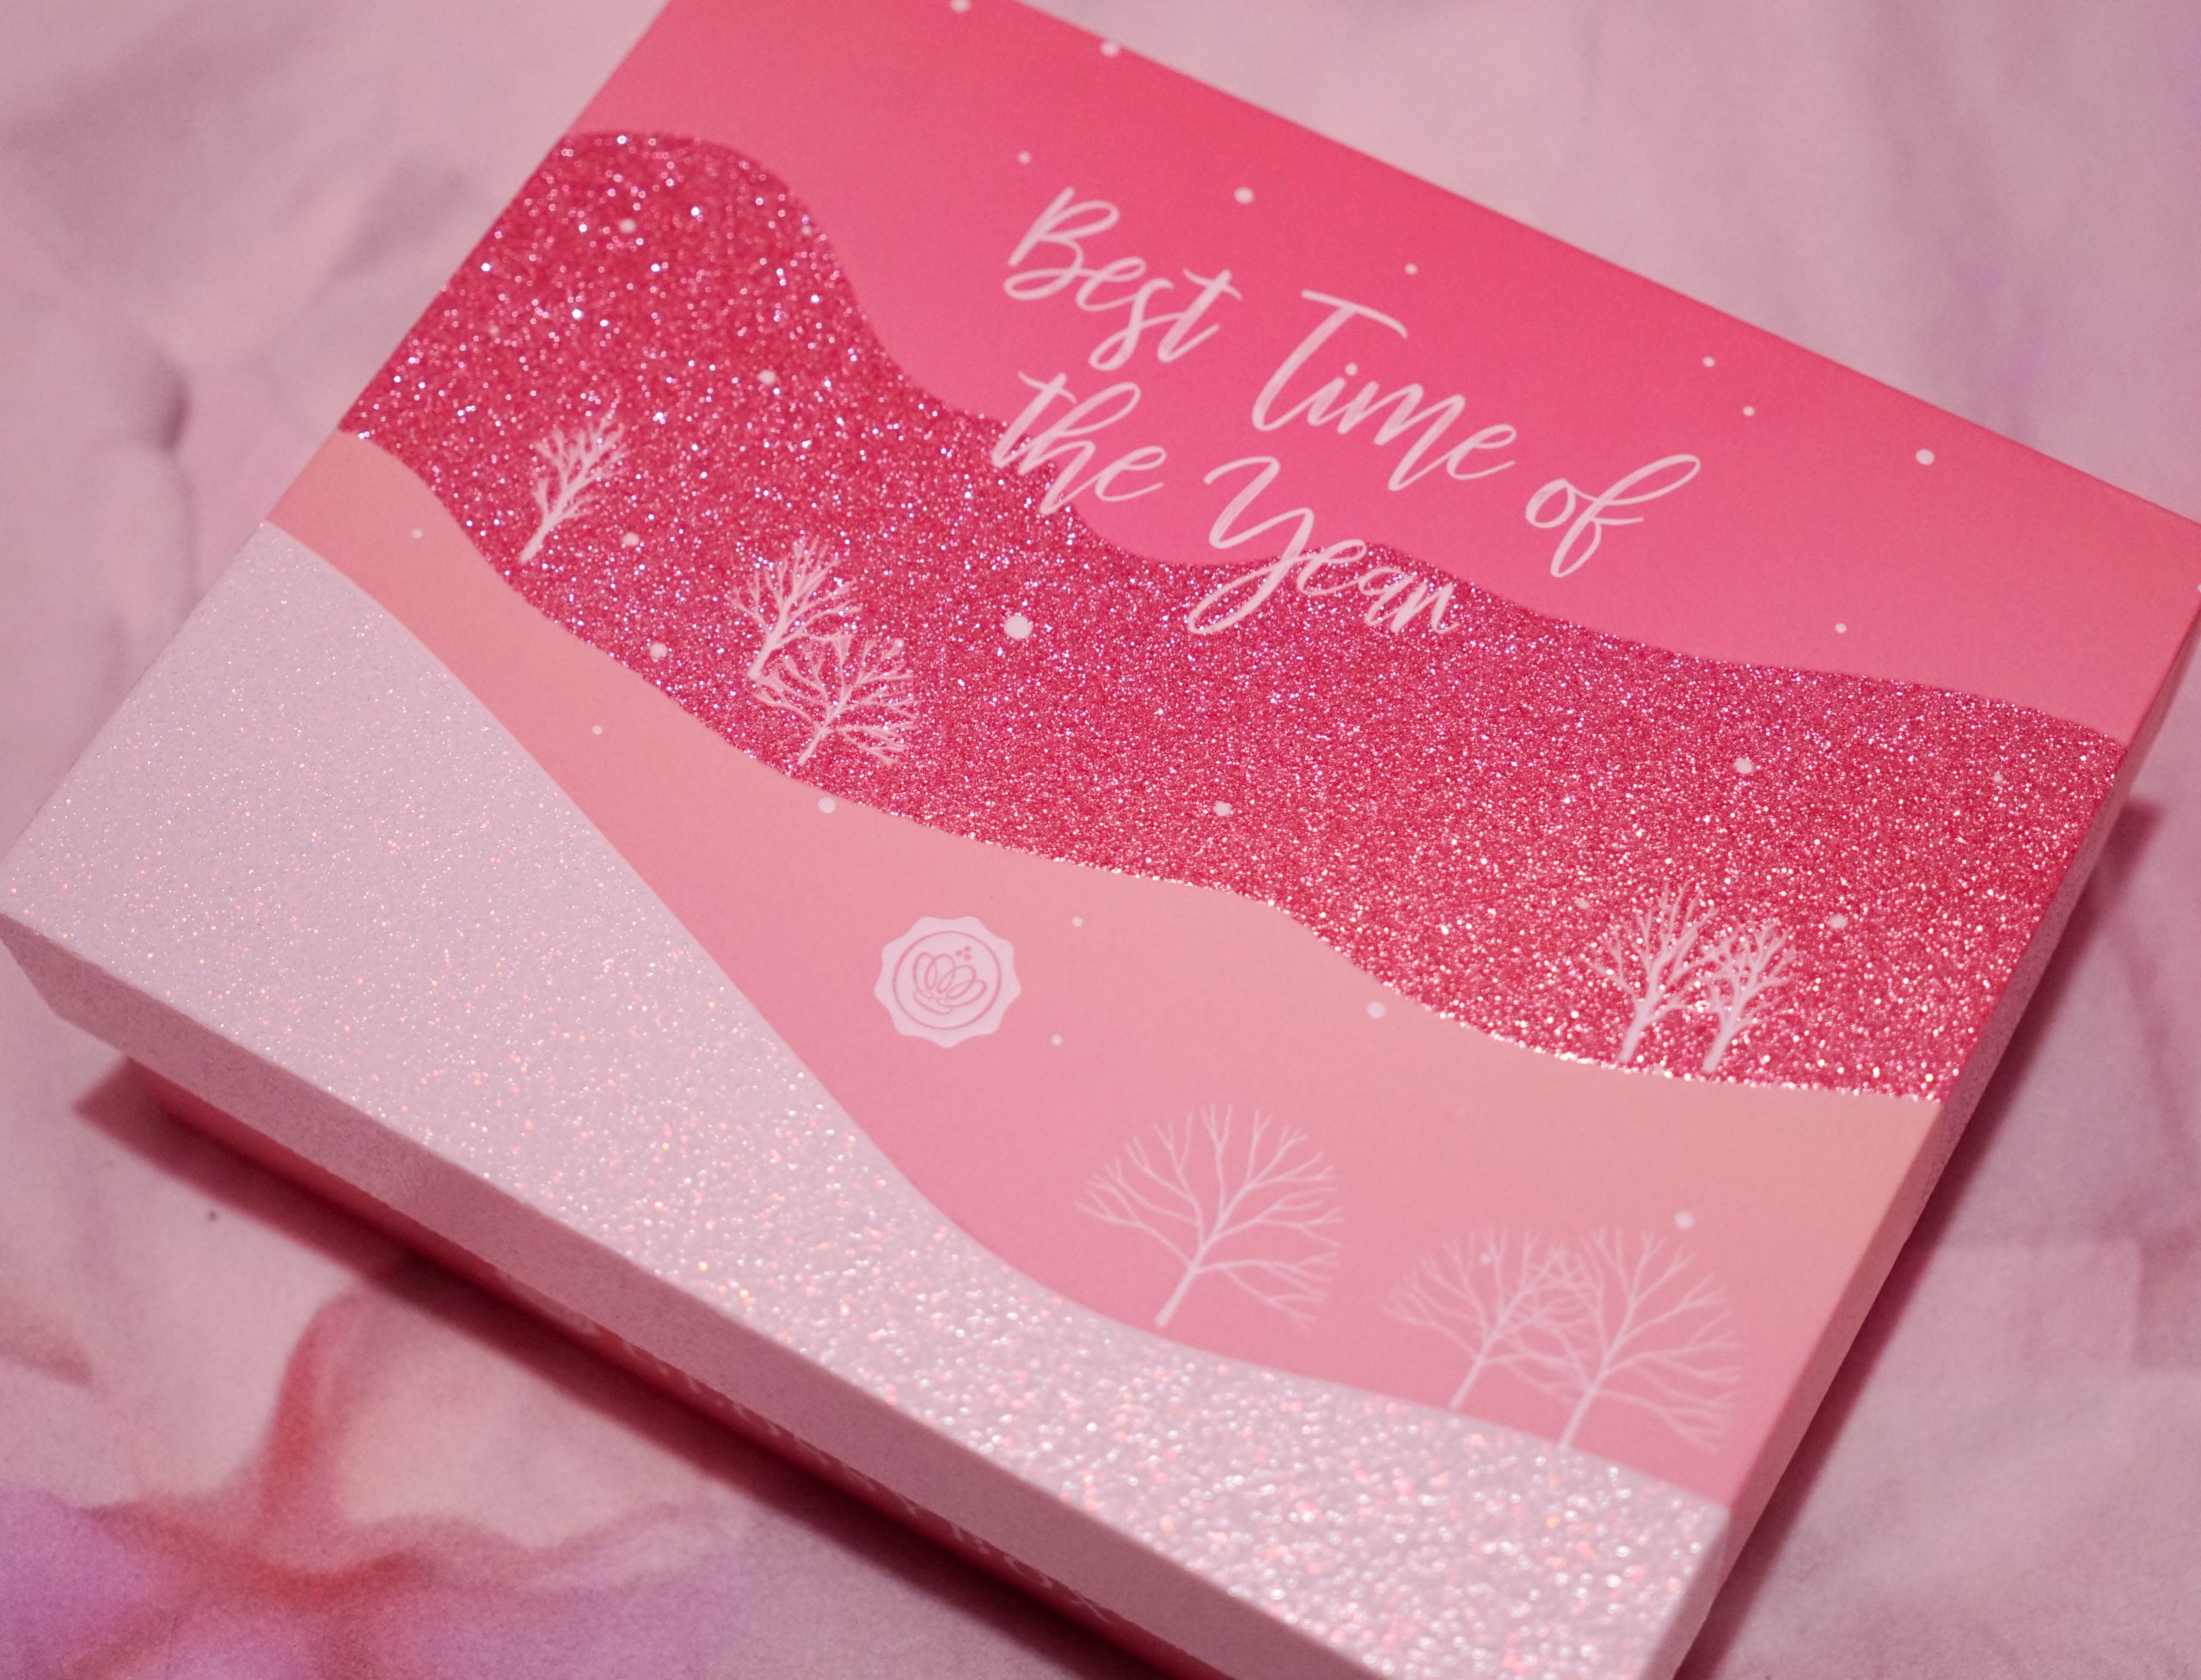 Glossybox UK December 2020: Best Time of the Year